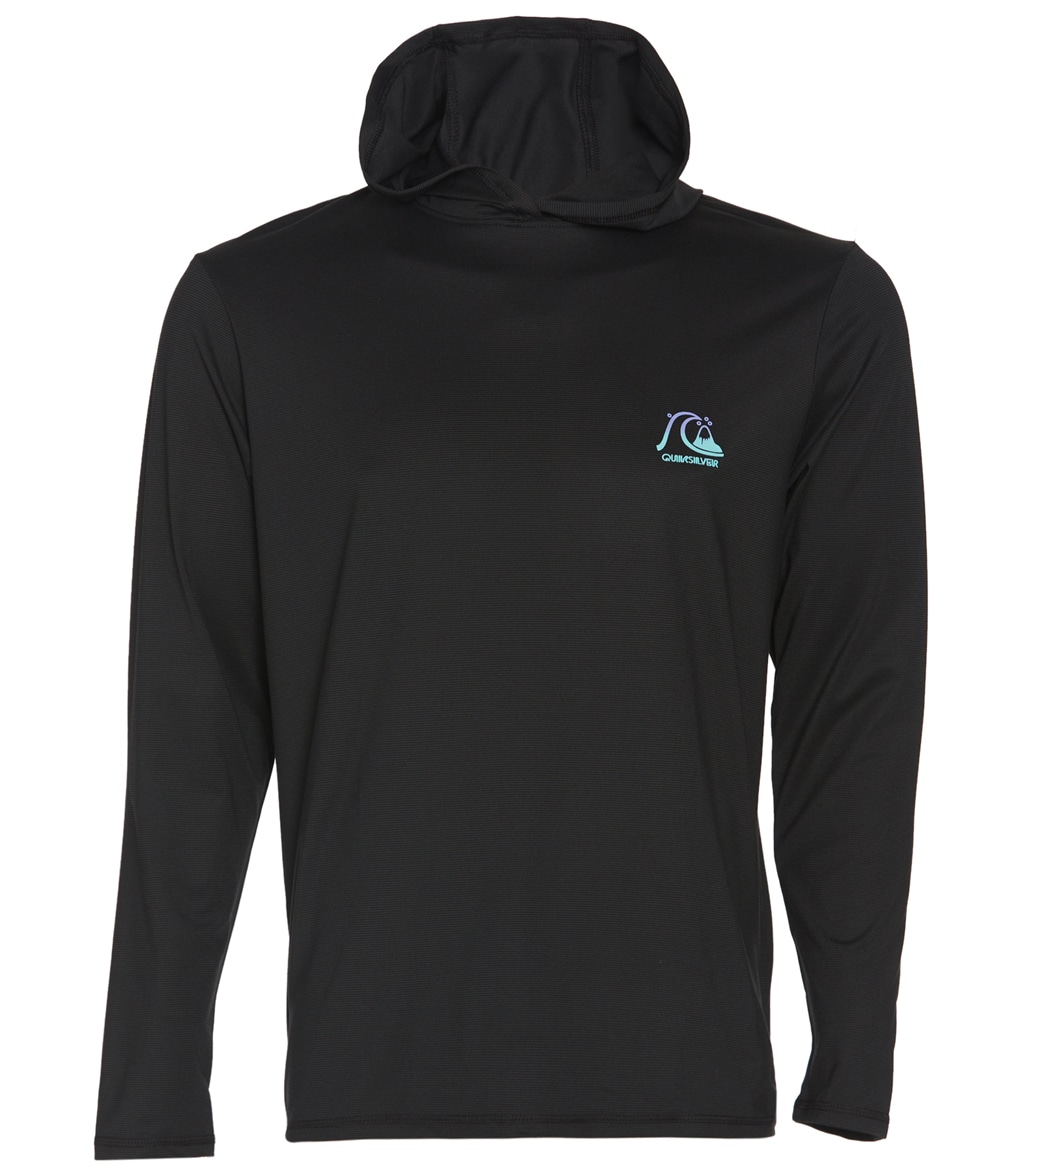 Quiksilver Men's Dredge Hooded Long Sleeve Upf 50 Surf Shirt - Black Heather Small Size Small Cotton/Polyester - Swimoutlet.com